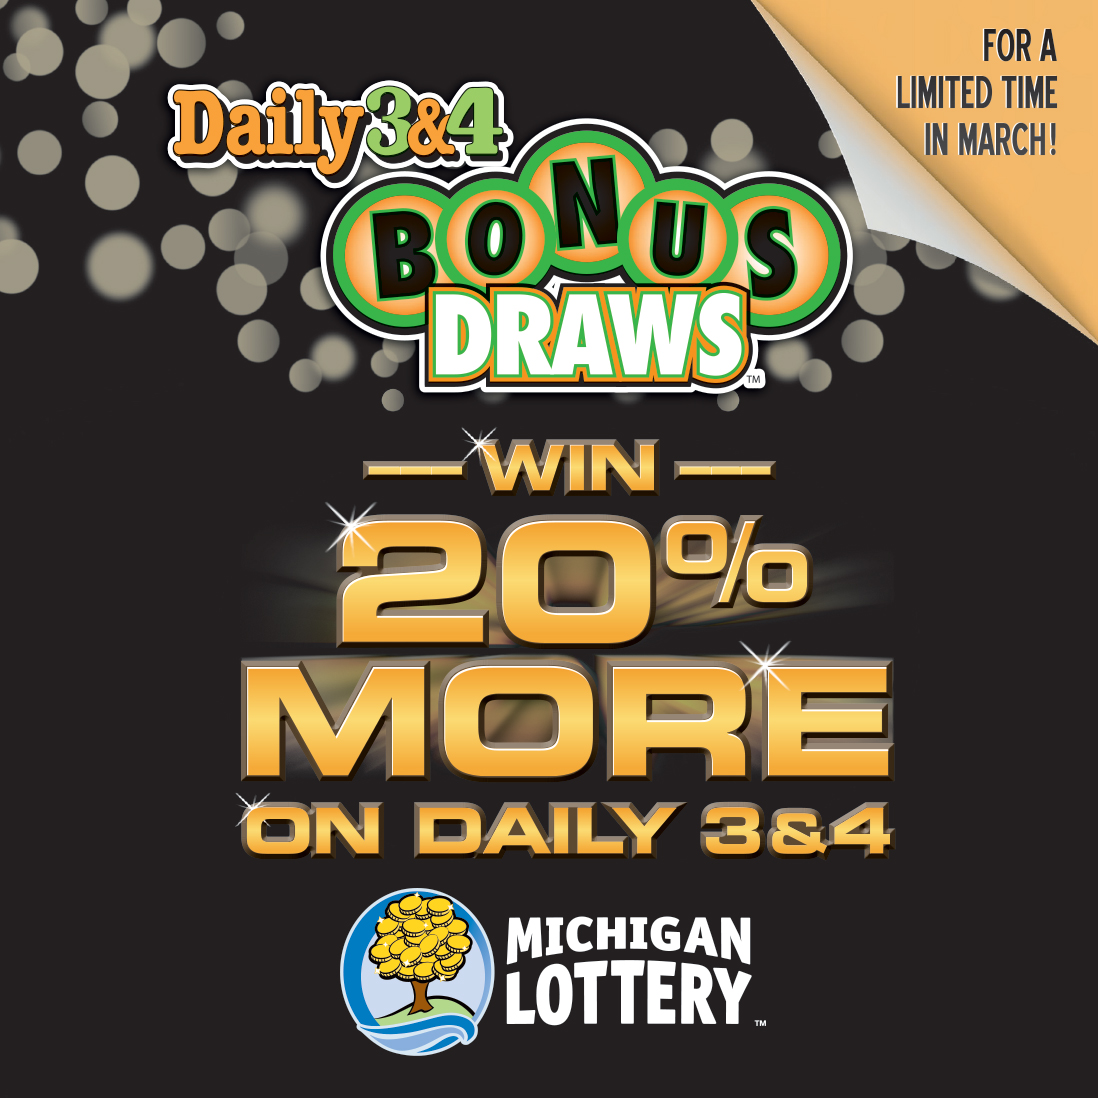 Bonus Draws Give Daily 3 and Daily 4 Players Chances to Win Extra Cash